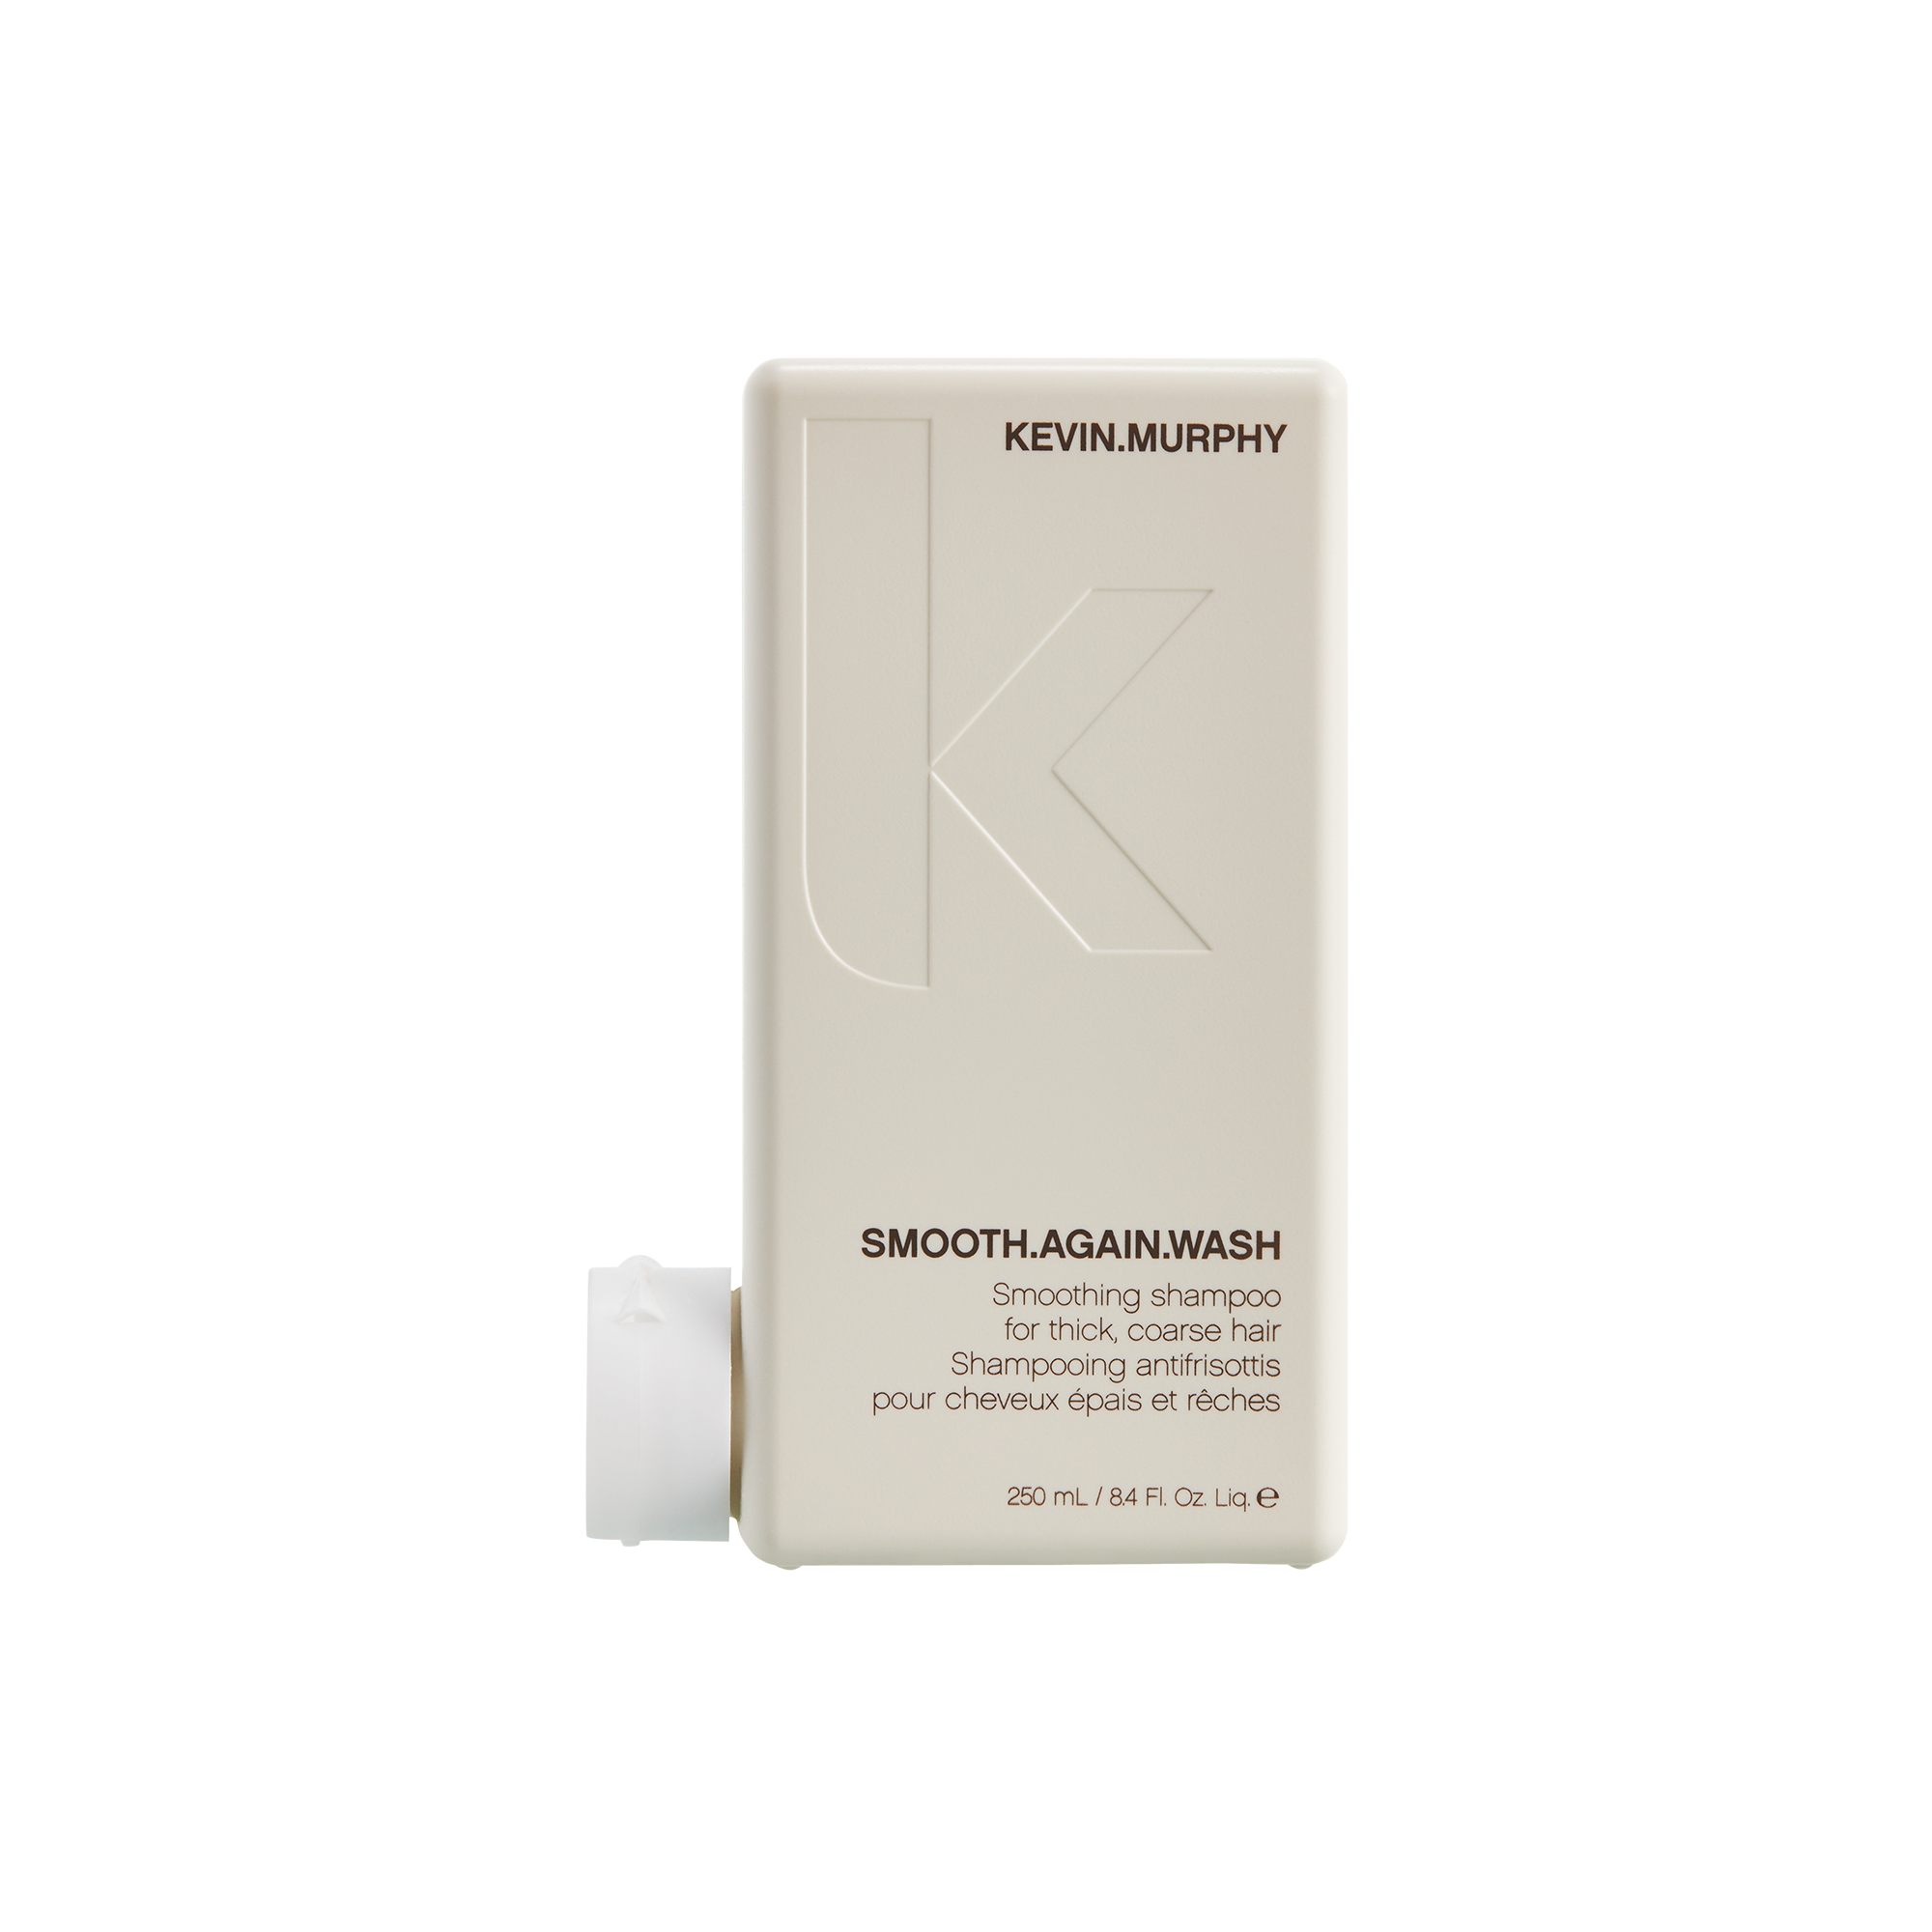 Kevin Murphy - Smooth.Again.Wash 250 ml.